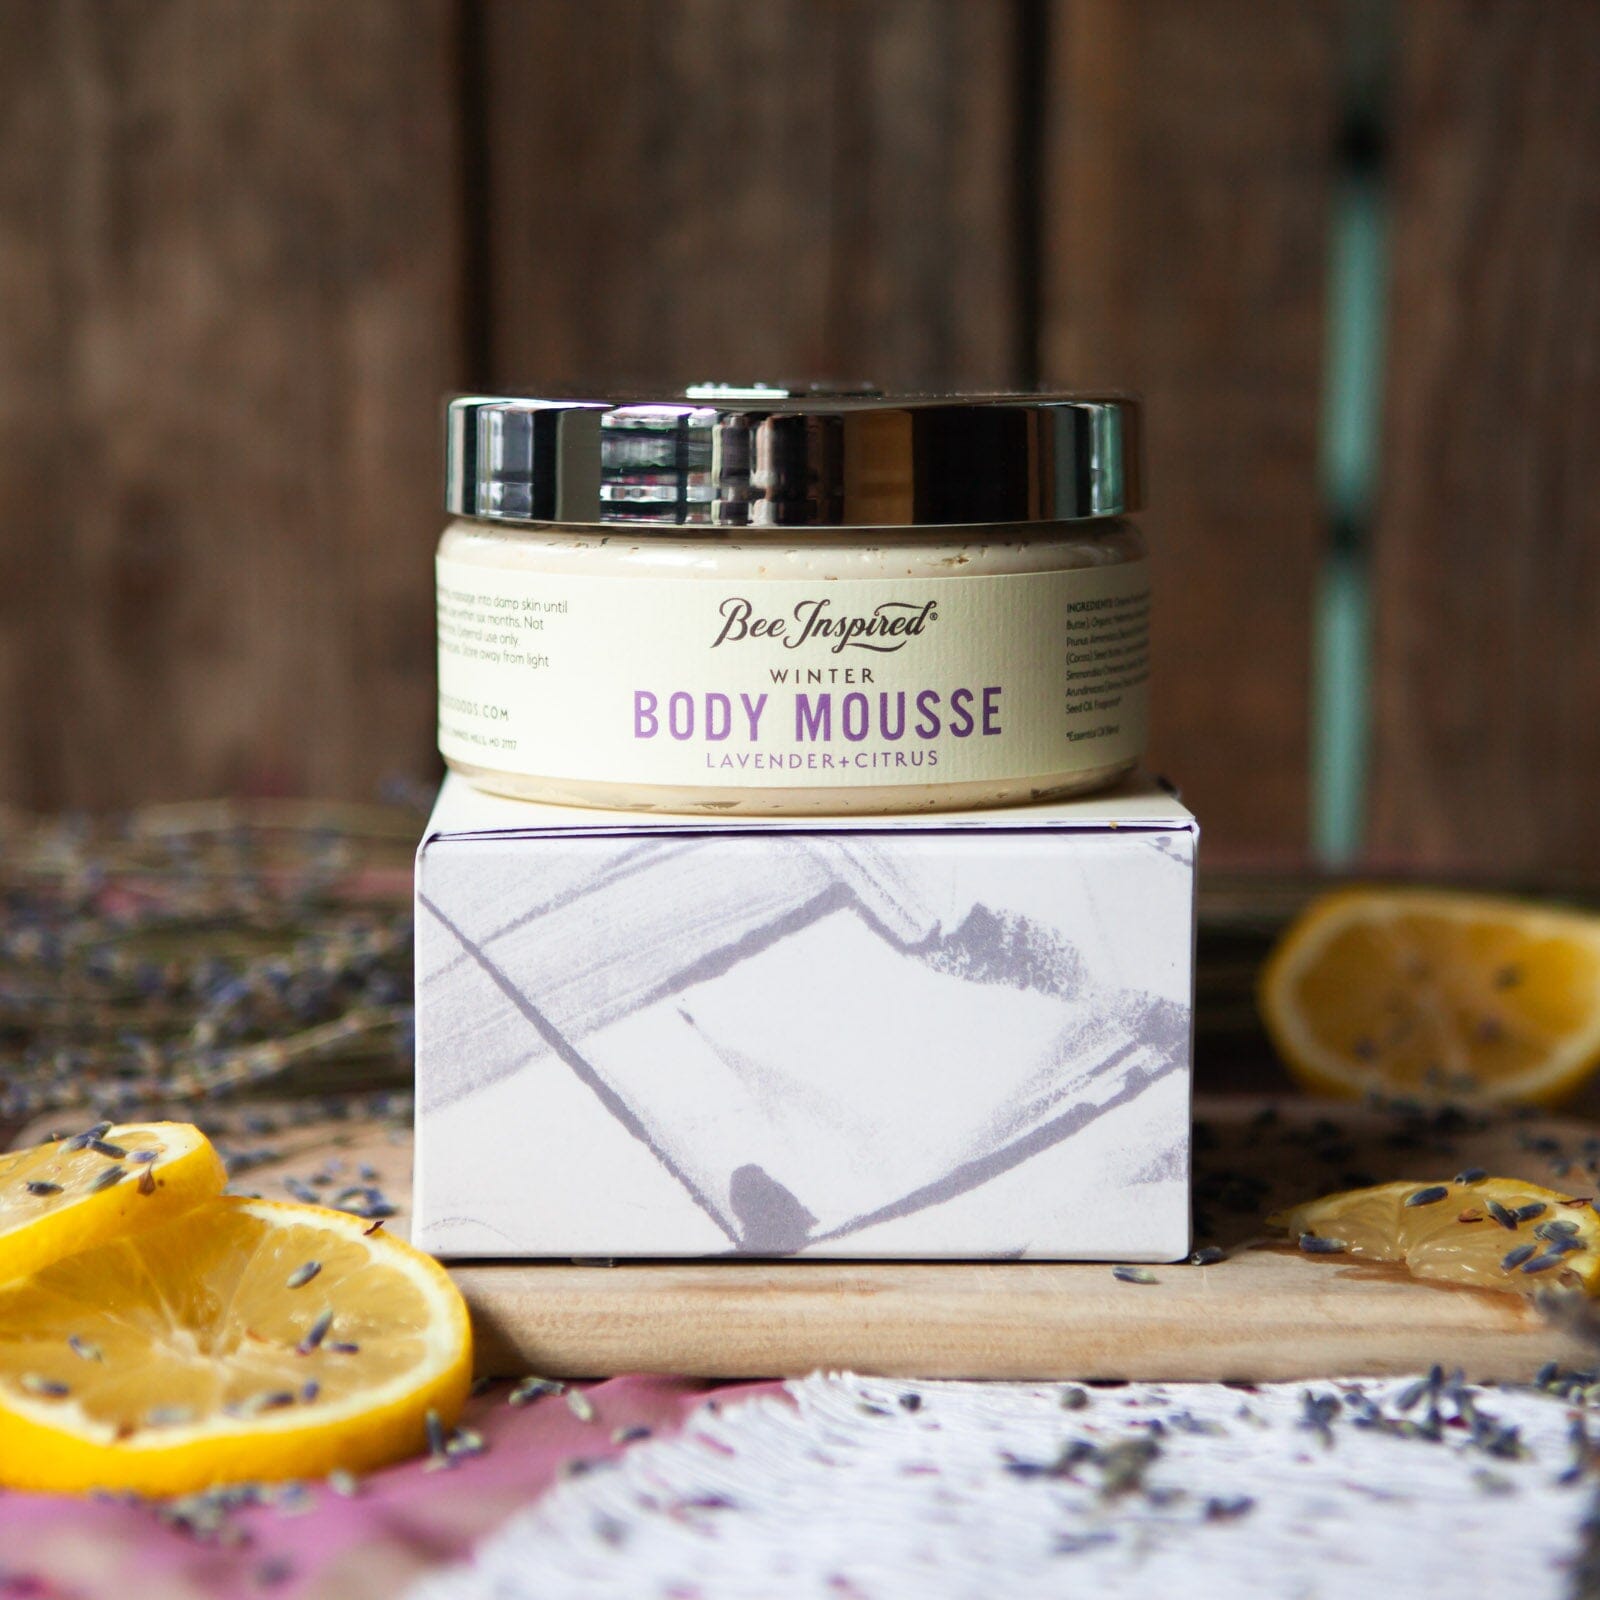 Bee Inspired Winter Body Mousse sitting on a box covered with artwork. The butter and box are sitting upon a cutting board and are surrounded by dried citrus and lavender.